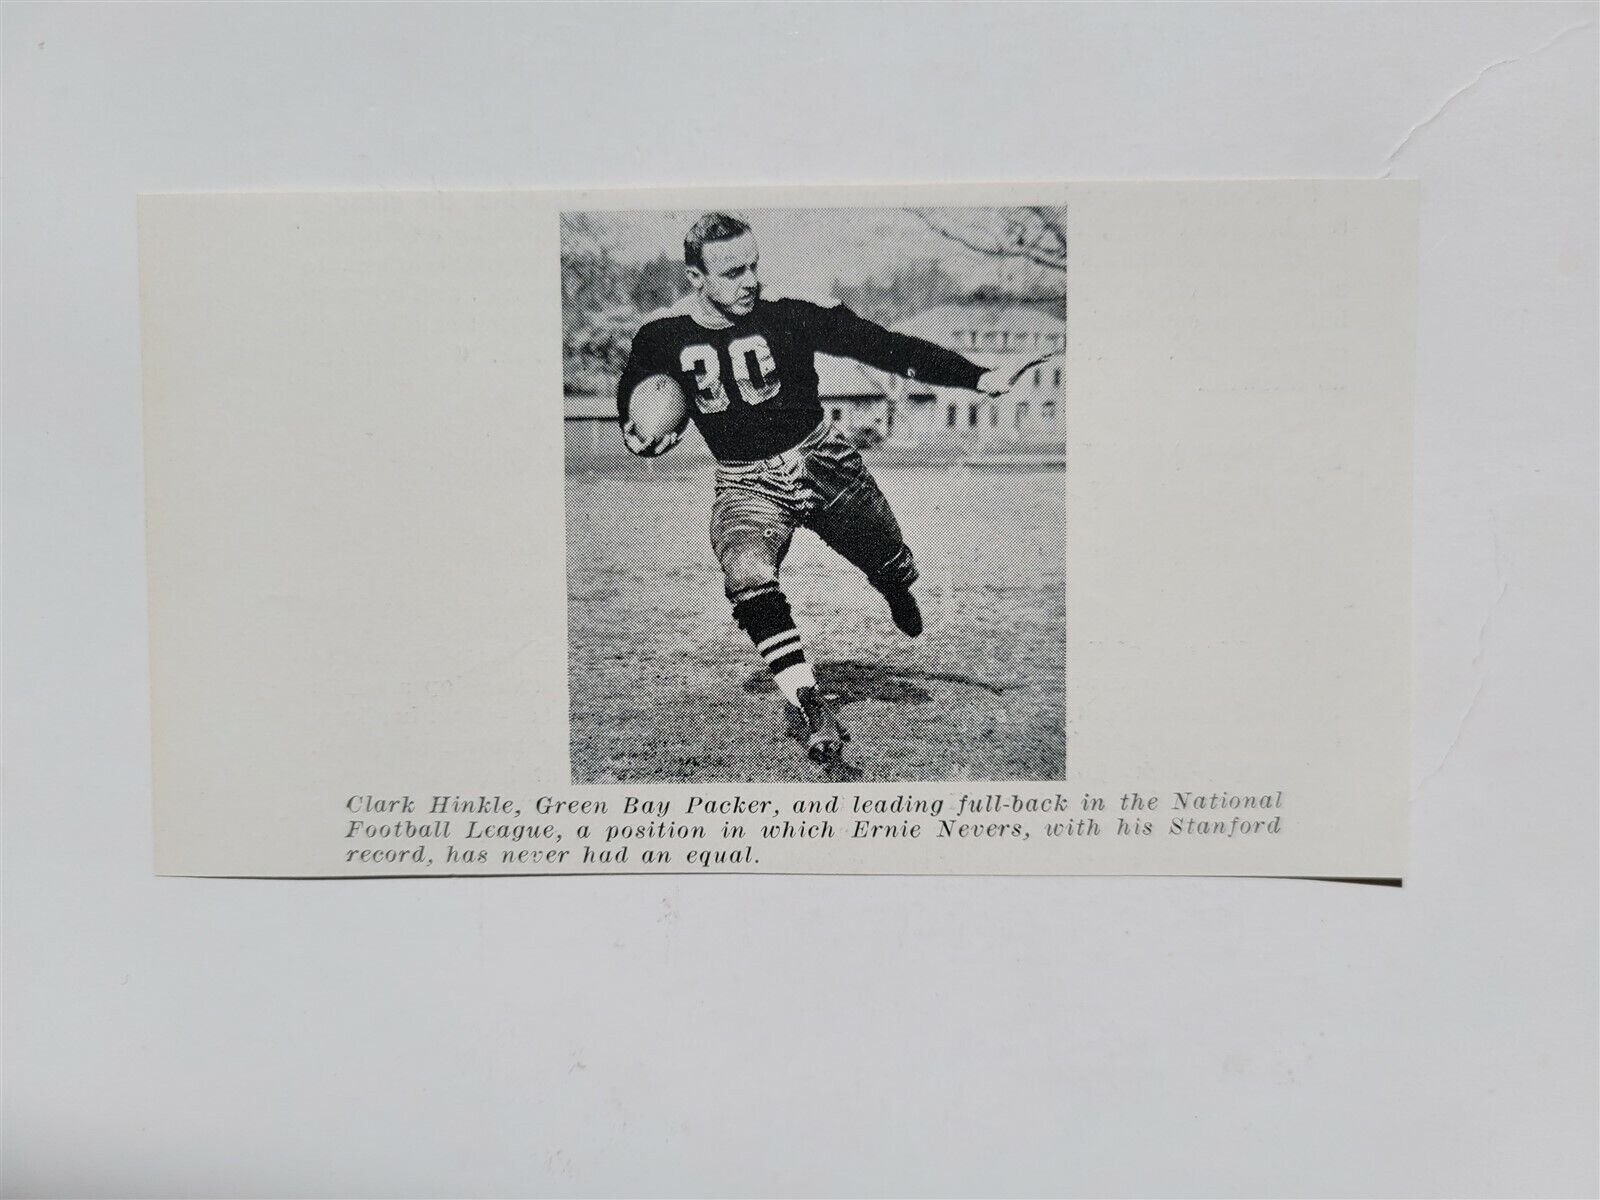 Clark Hinkle Green Bay Packers 1938 Football Picture